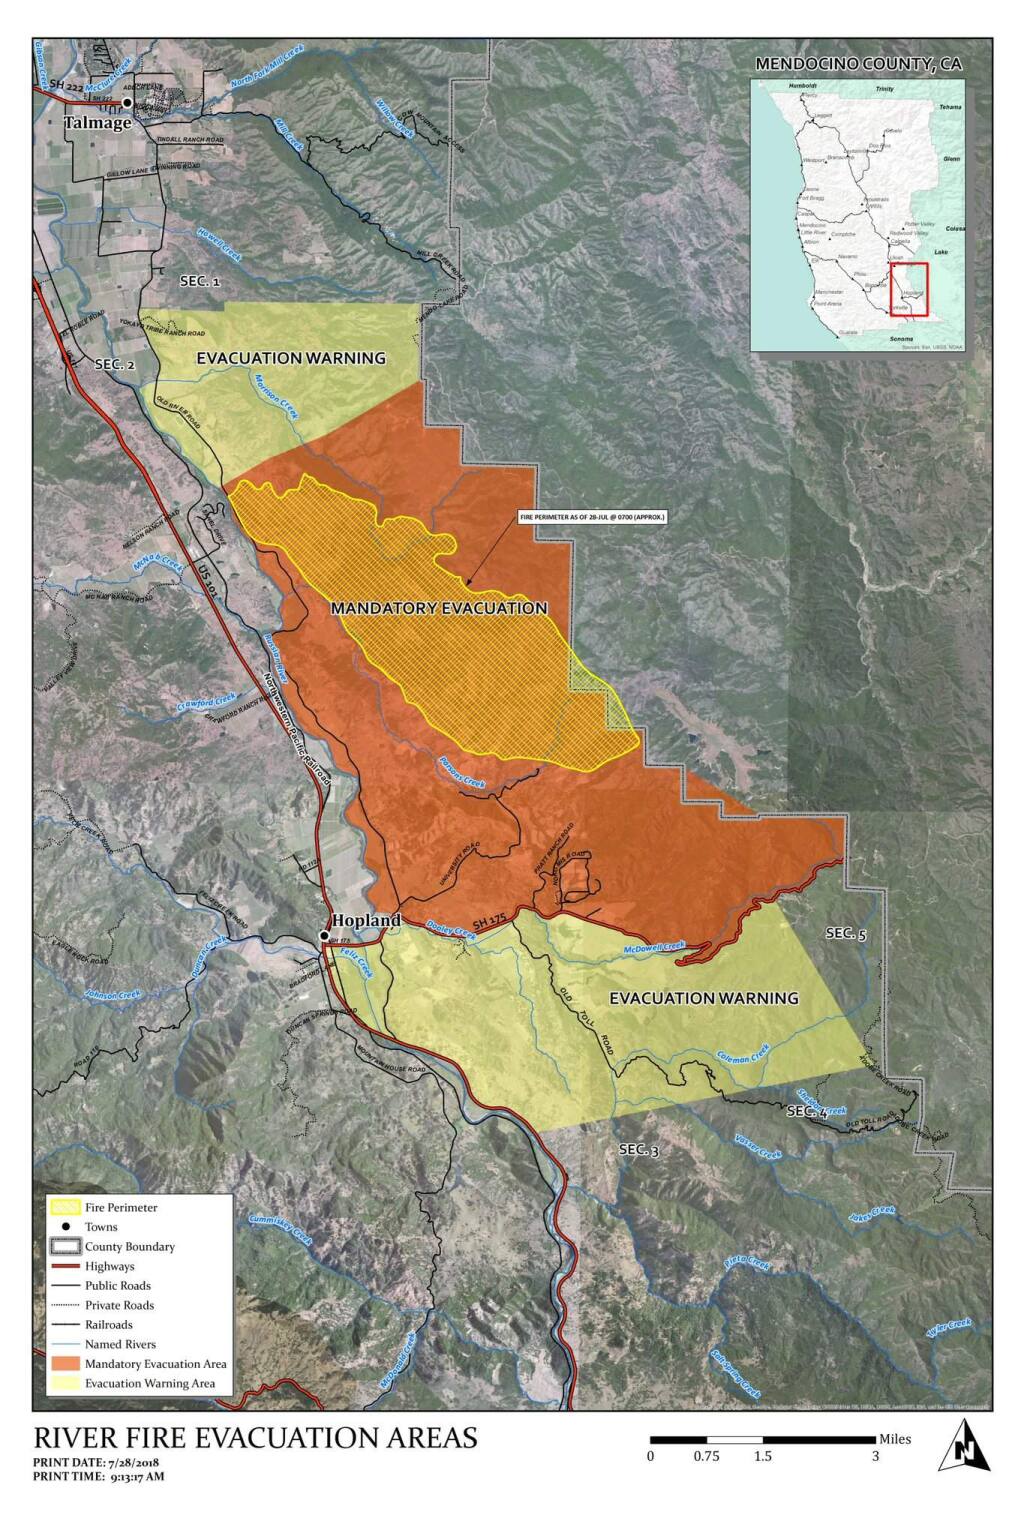 River fire evacutation map, Saturday, July 28, 2018. (Mendocino County Sheriff's Office)